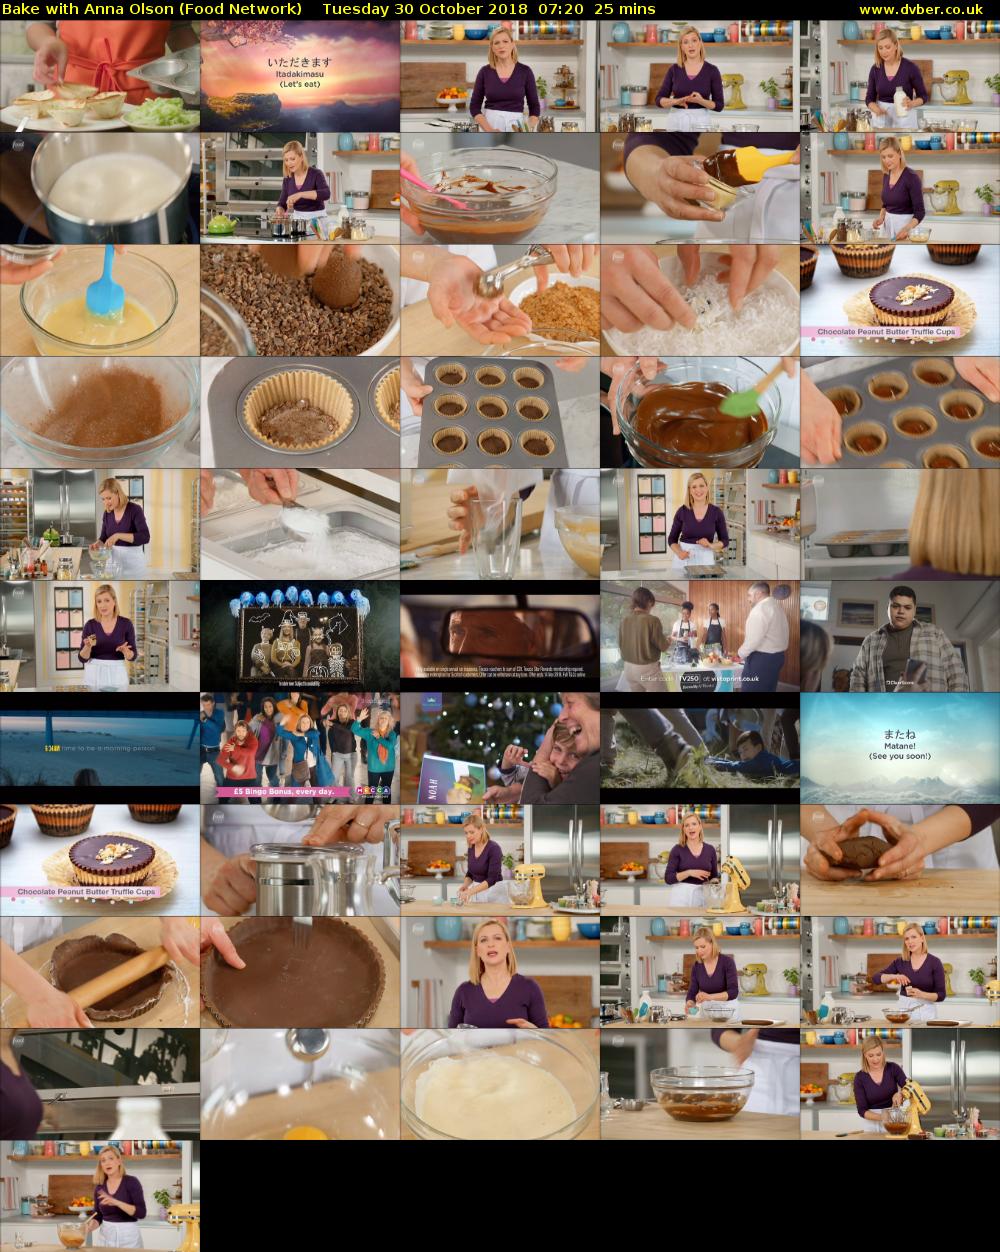 Bake with Anna Olson (Food Network) Tuesday 30 October 2018 07:20 - 07:45